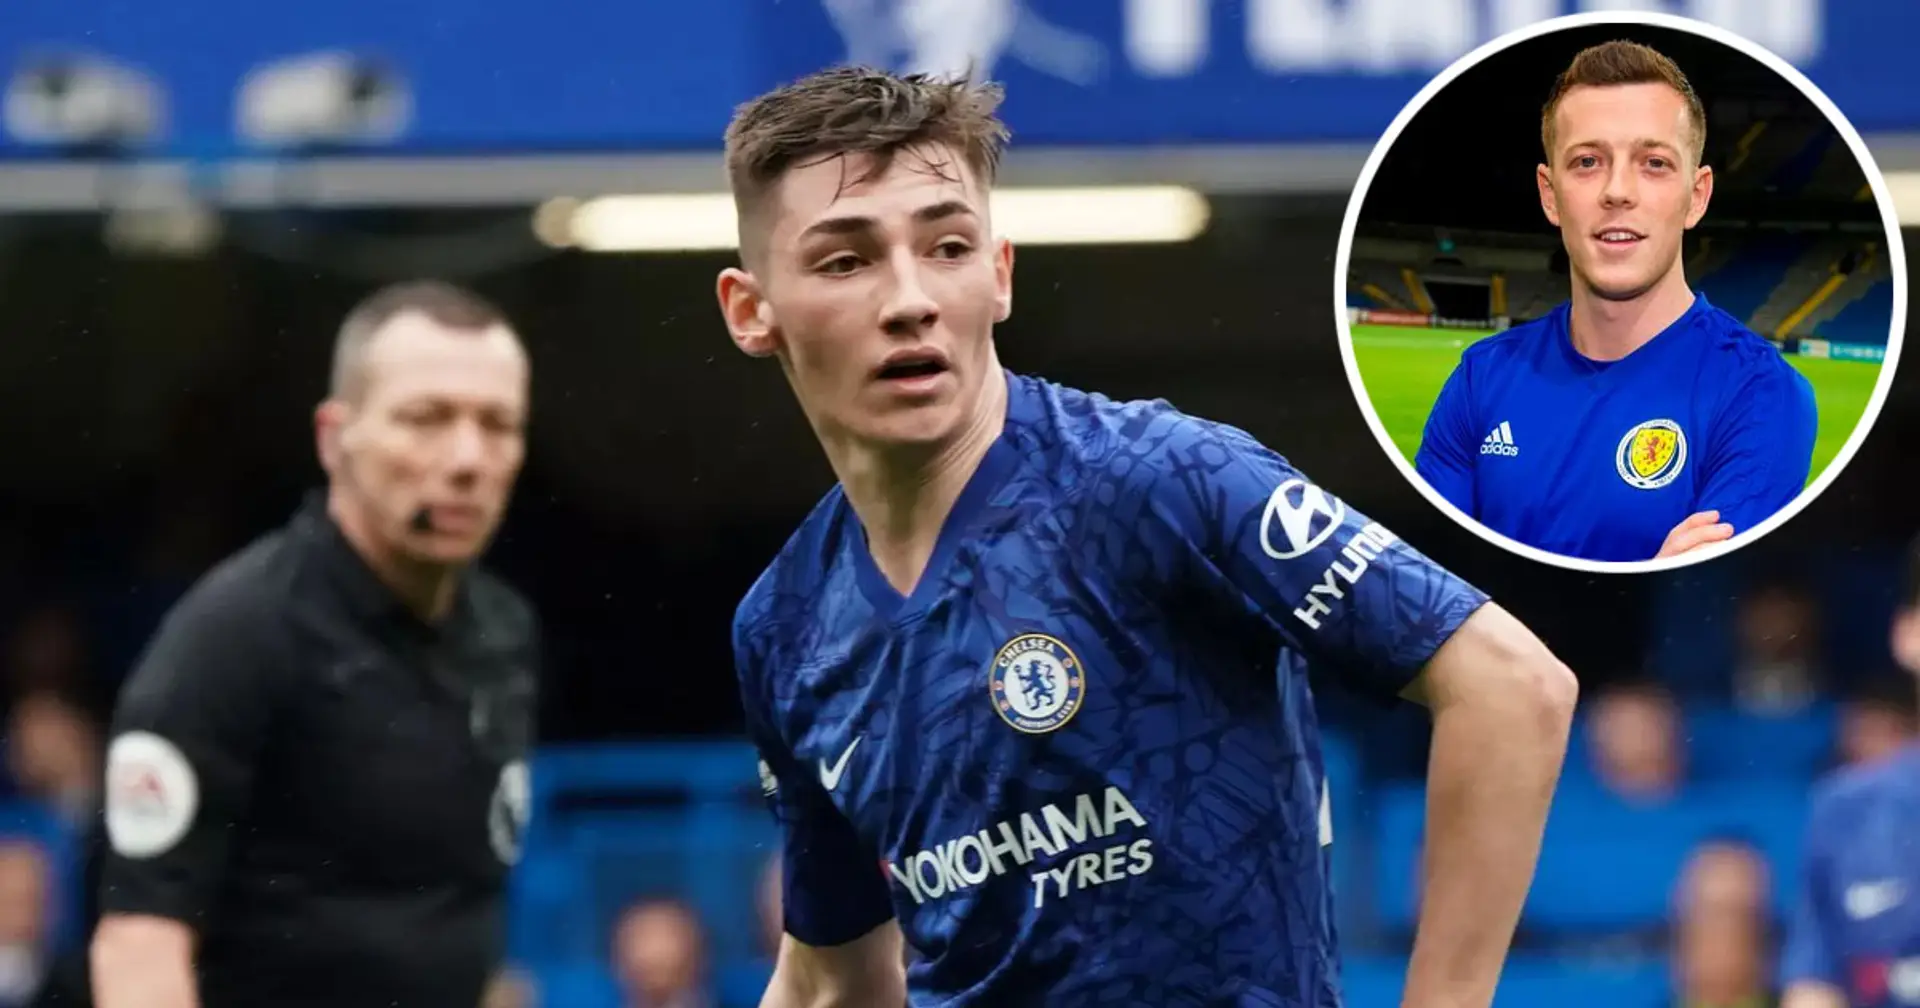 'It's great for Scotland to be producing players who can go and play in the Premier League at 18': Celtic star Callum McGregor tips Billy Gilmour to help Scotland's Euro 2020 bid